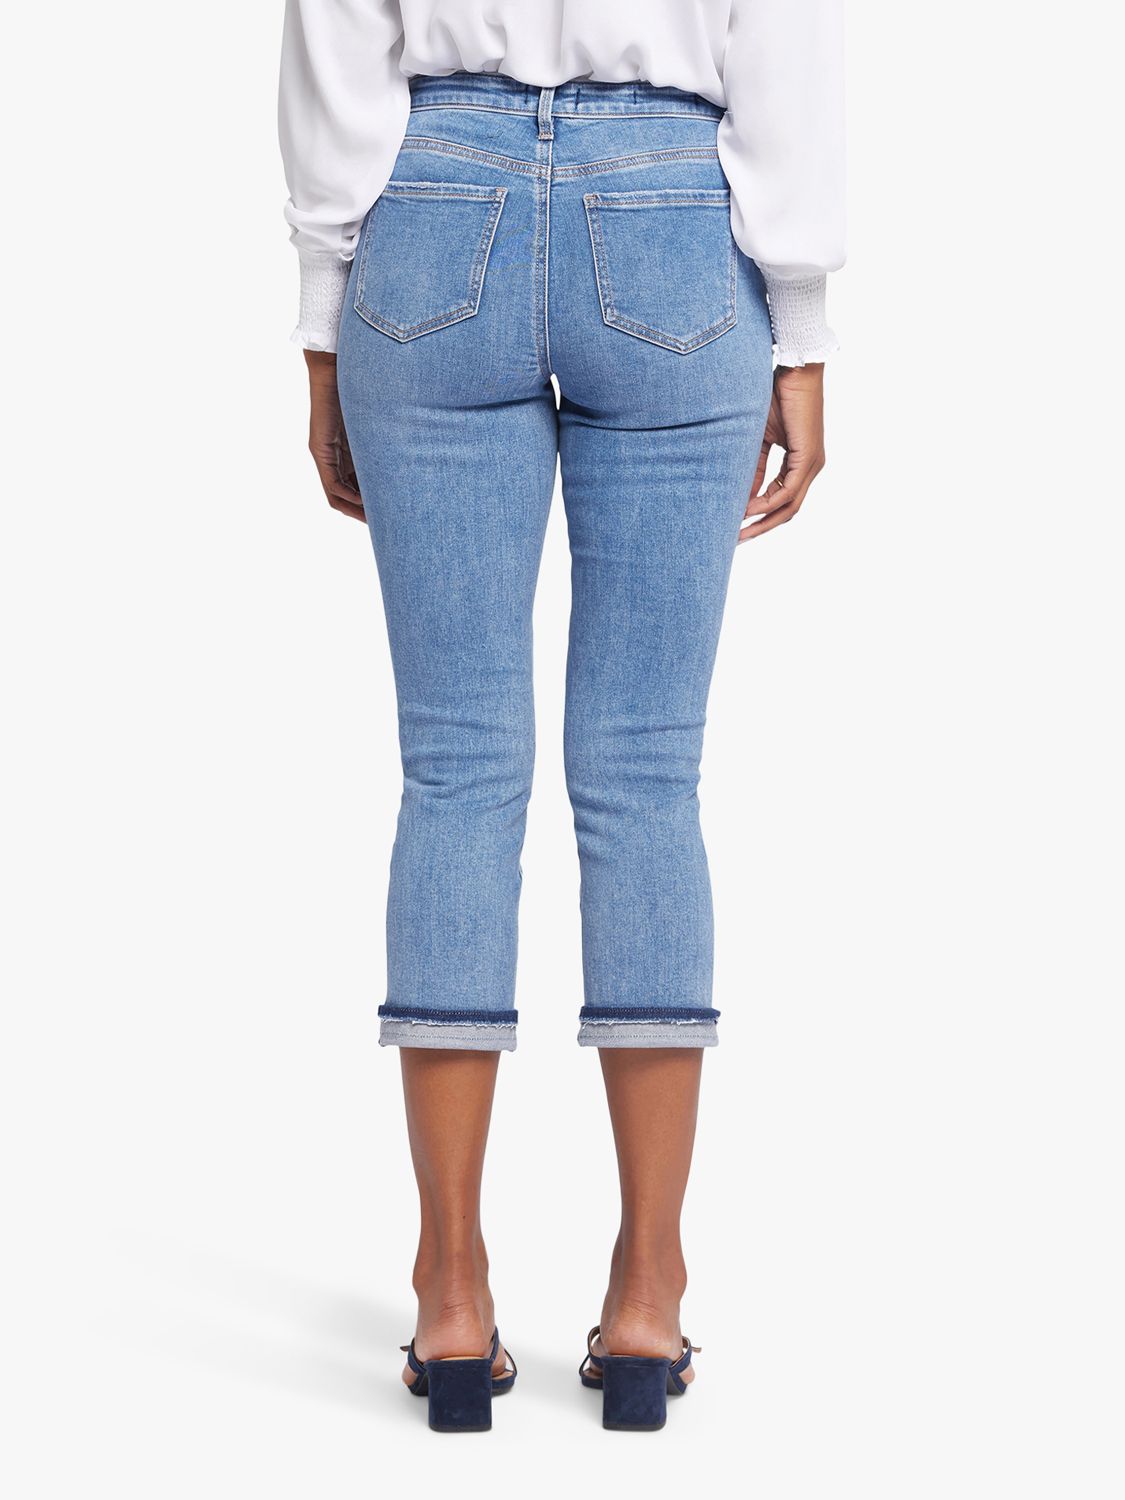 Chloe Capri Jeans In Plus Size With High Rise And Released Hems - Optic  White White | NYDJ